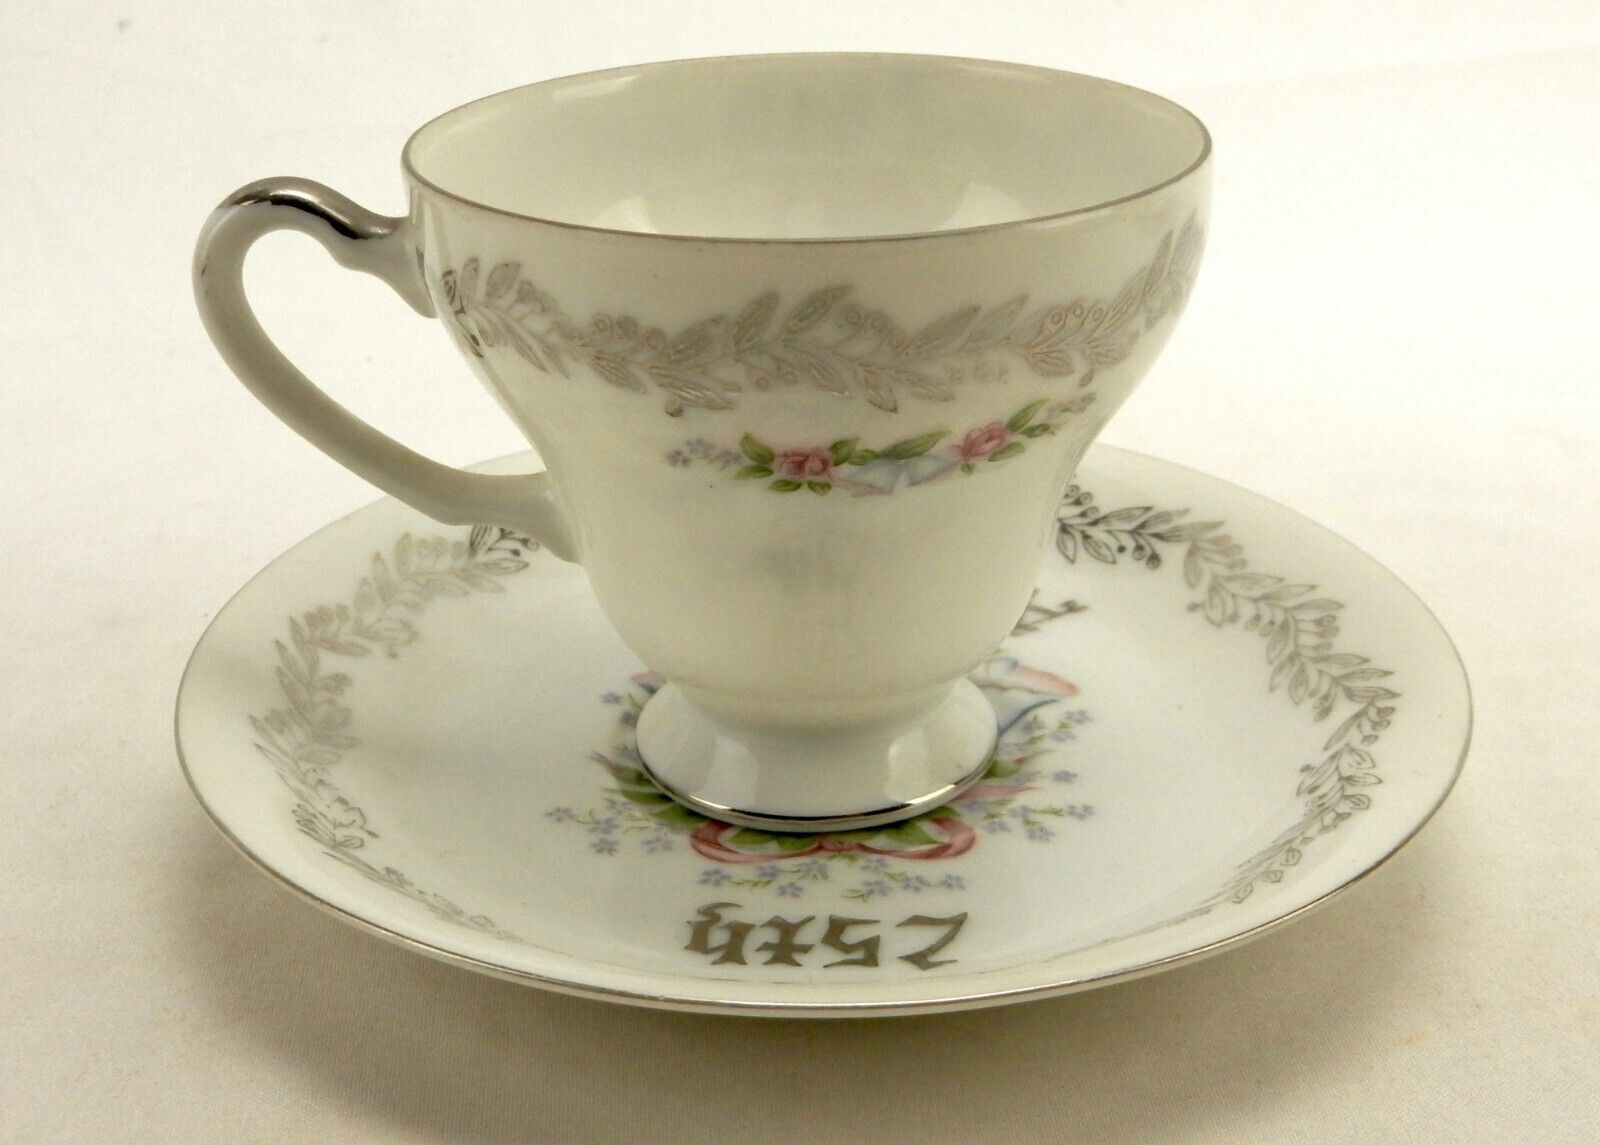 Primary image for 25th Anniversary Cup and Saucer Set, Flowers & Bells, Vintage Porcelain, Japan